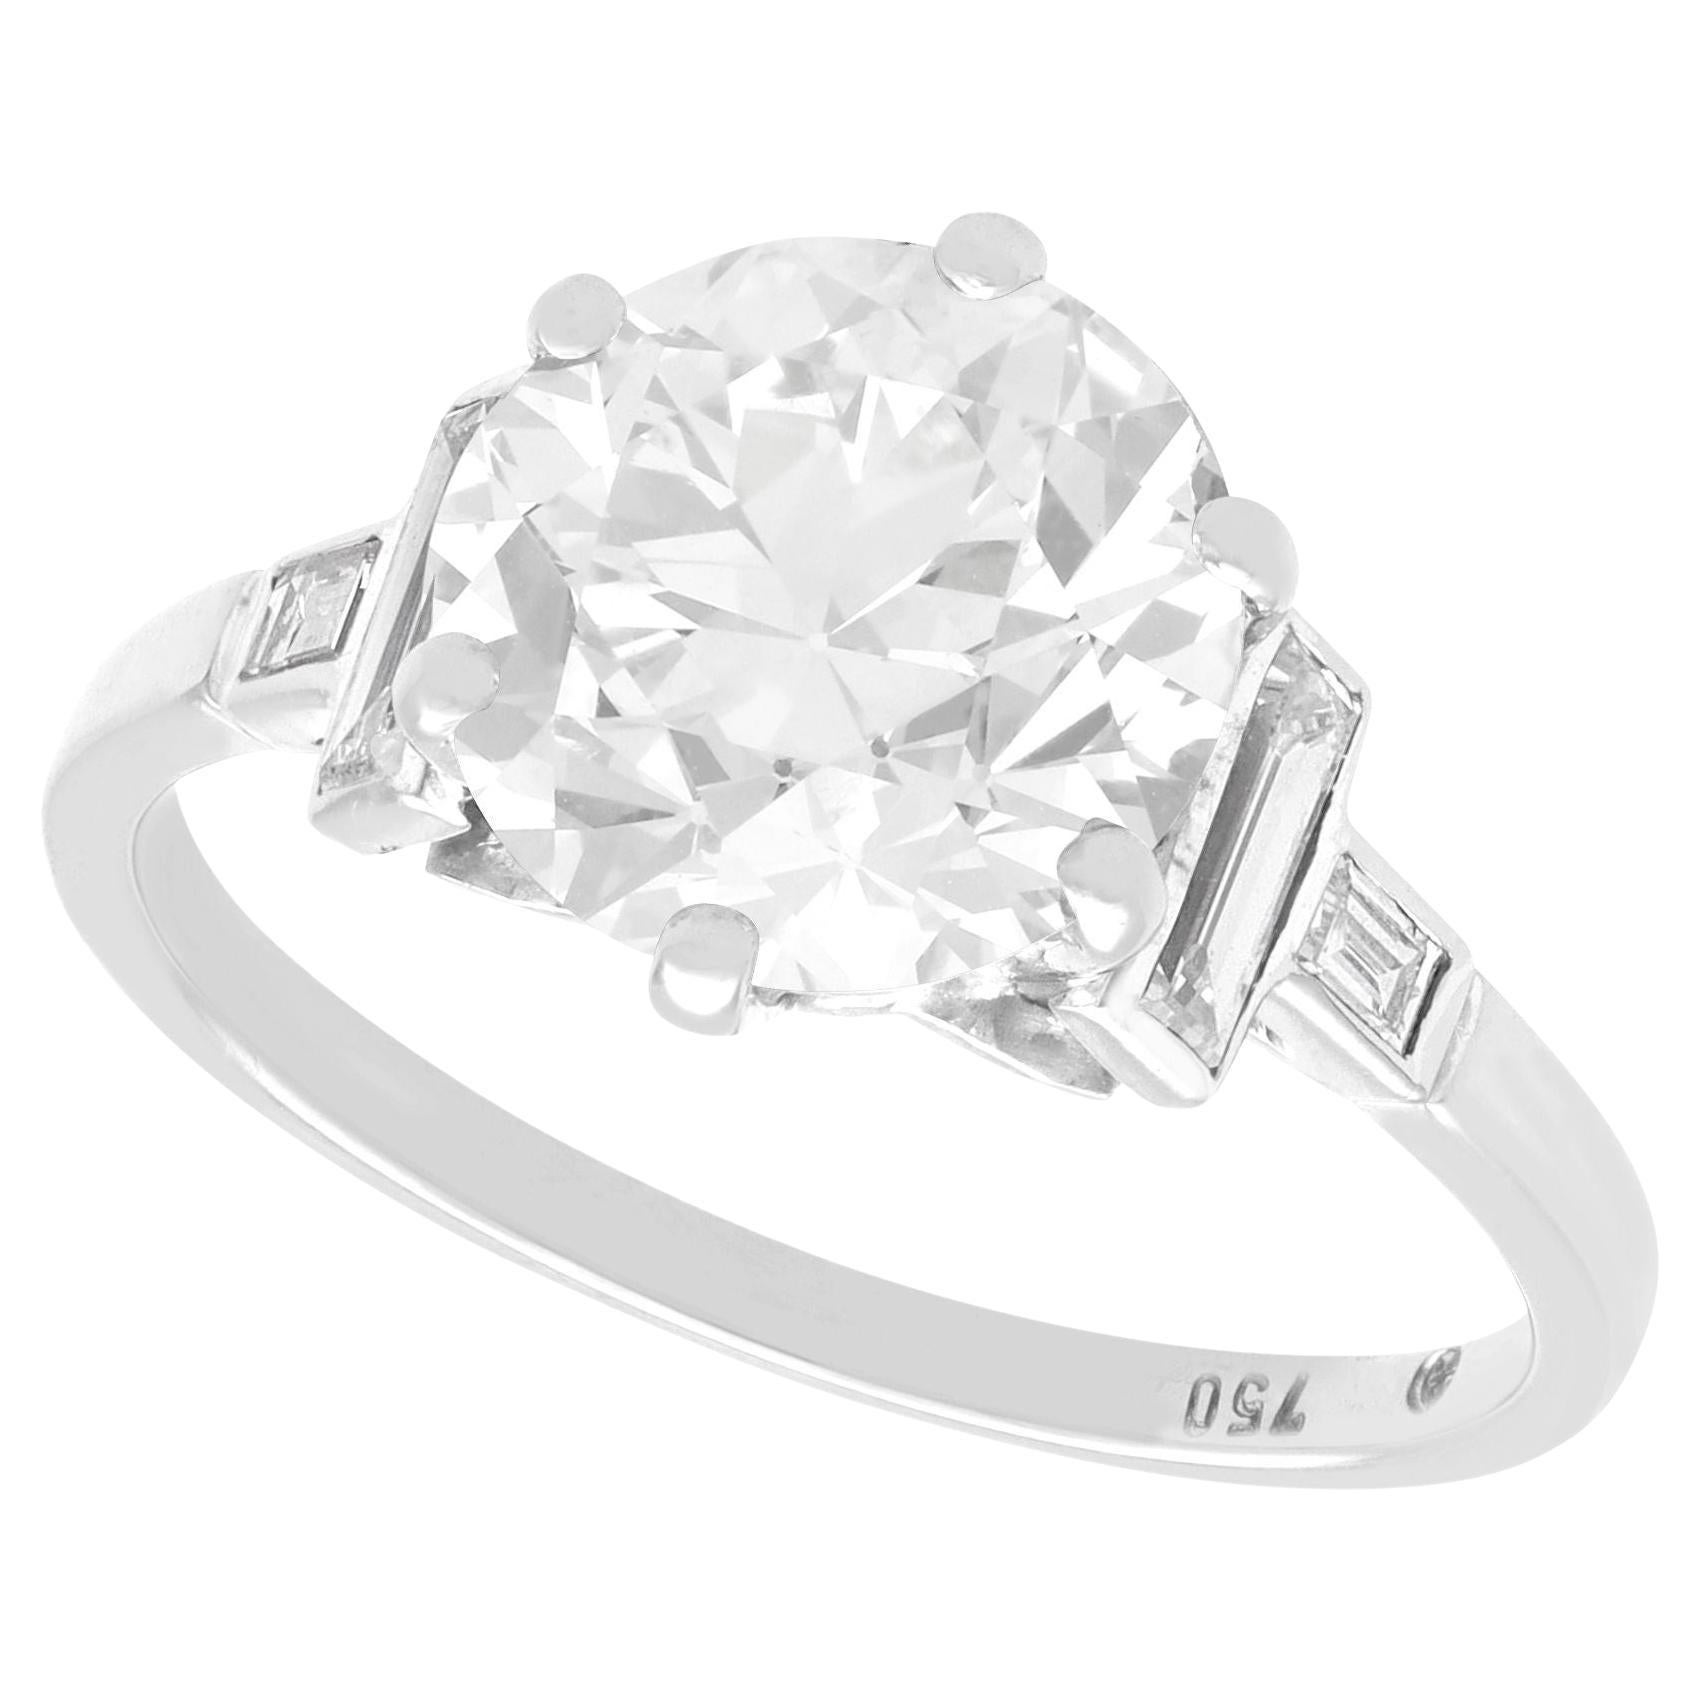 Antique 3.40 Carat Diamond and White Gold Solitaire Ring